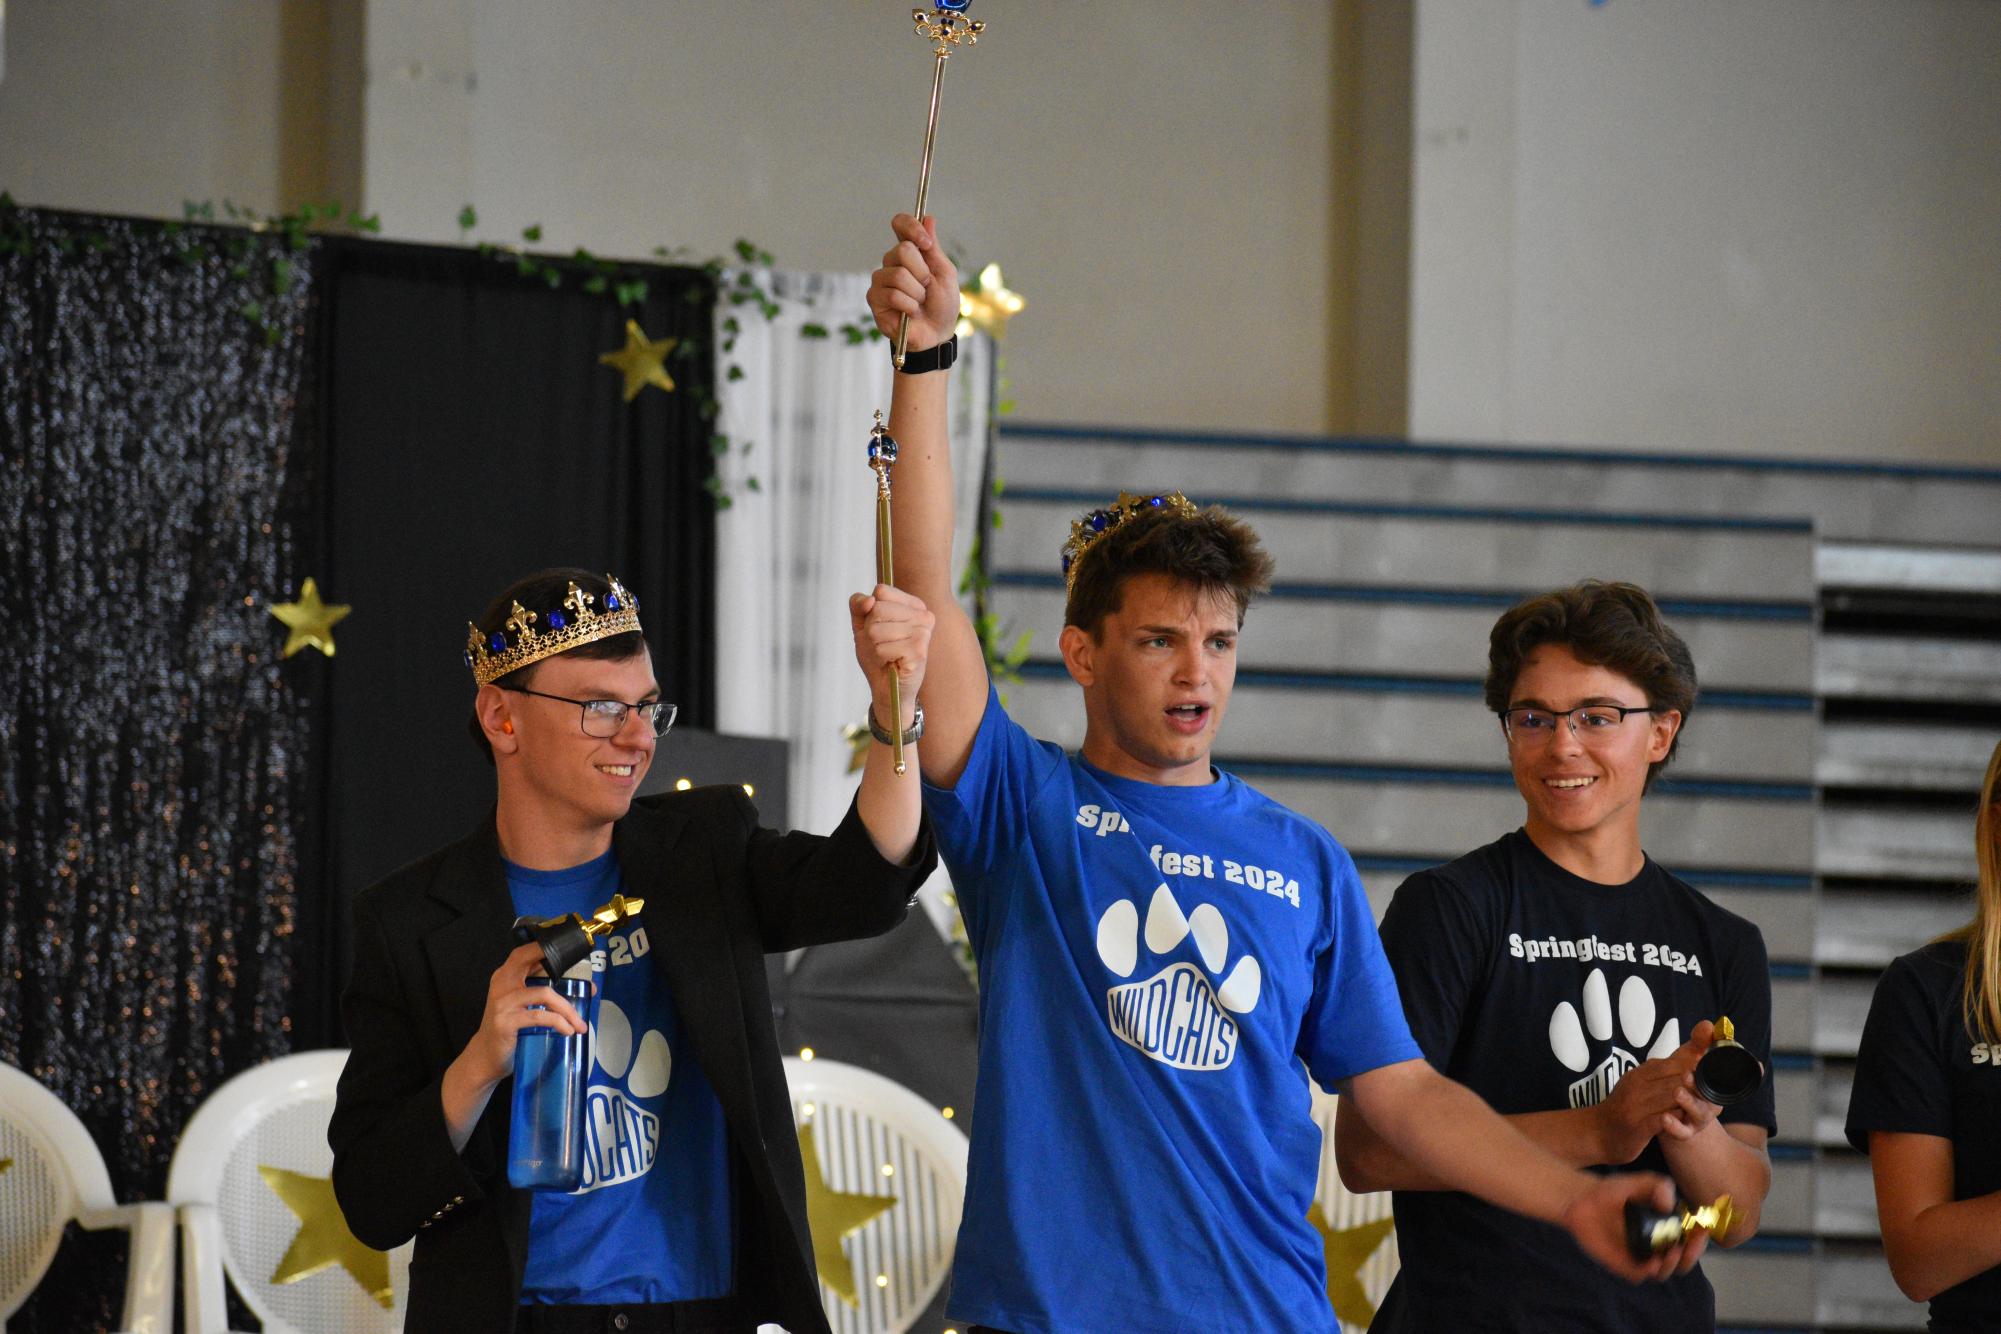 After being crowned, Halstead and McKnight hold their sceptors high. The pair were honored to win!